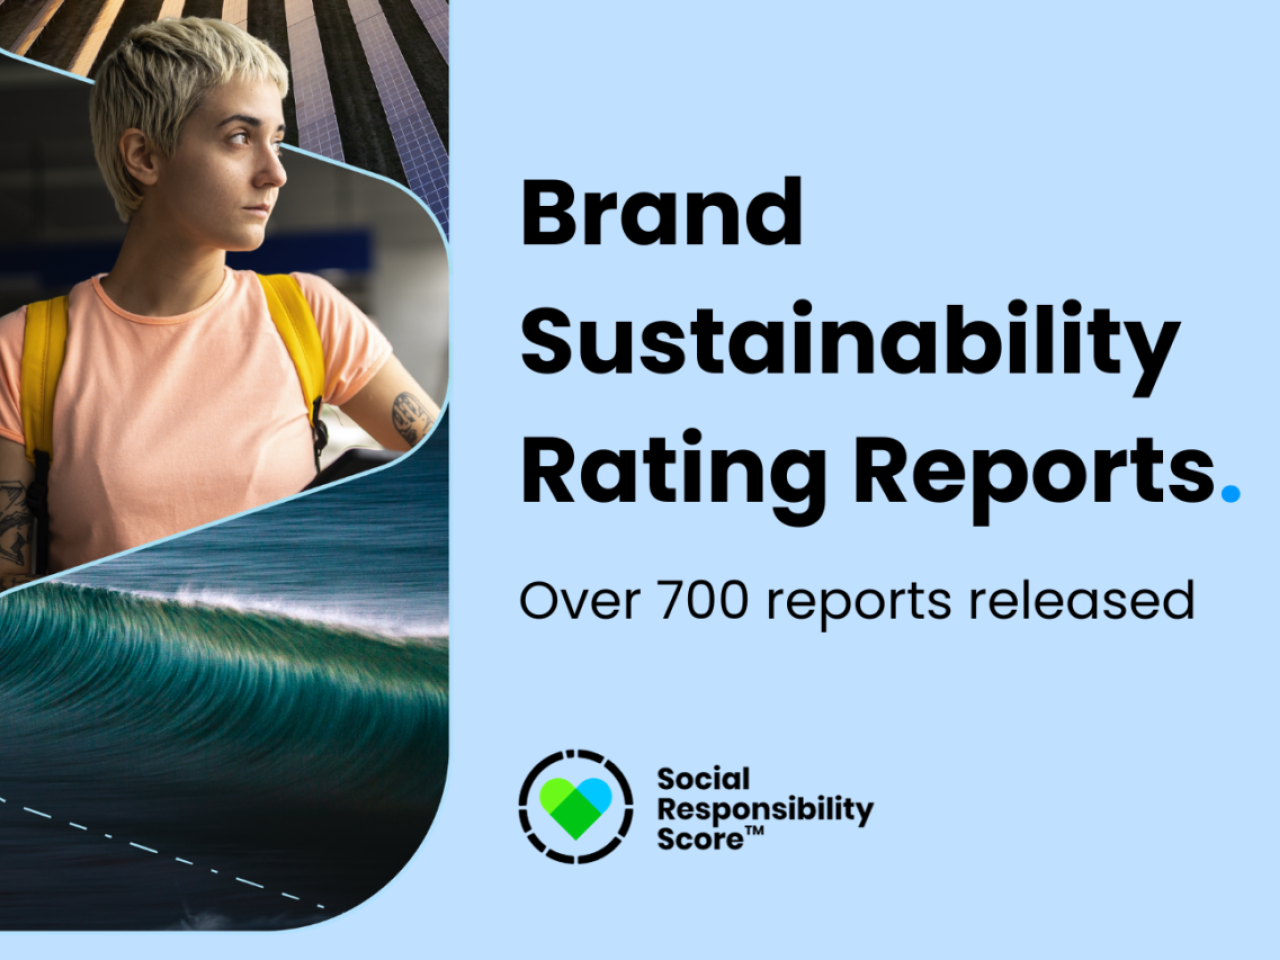 "Brand Sustainability Rating Reports." Cover